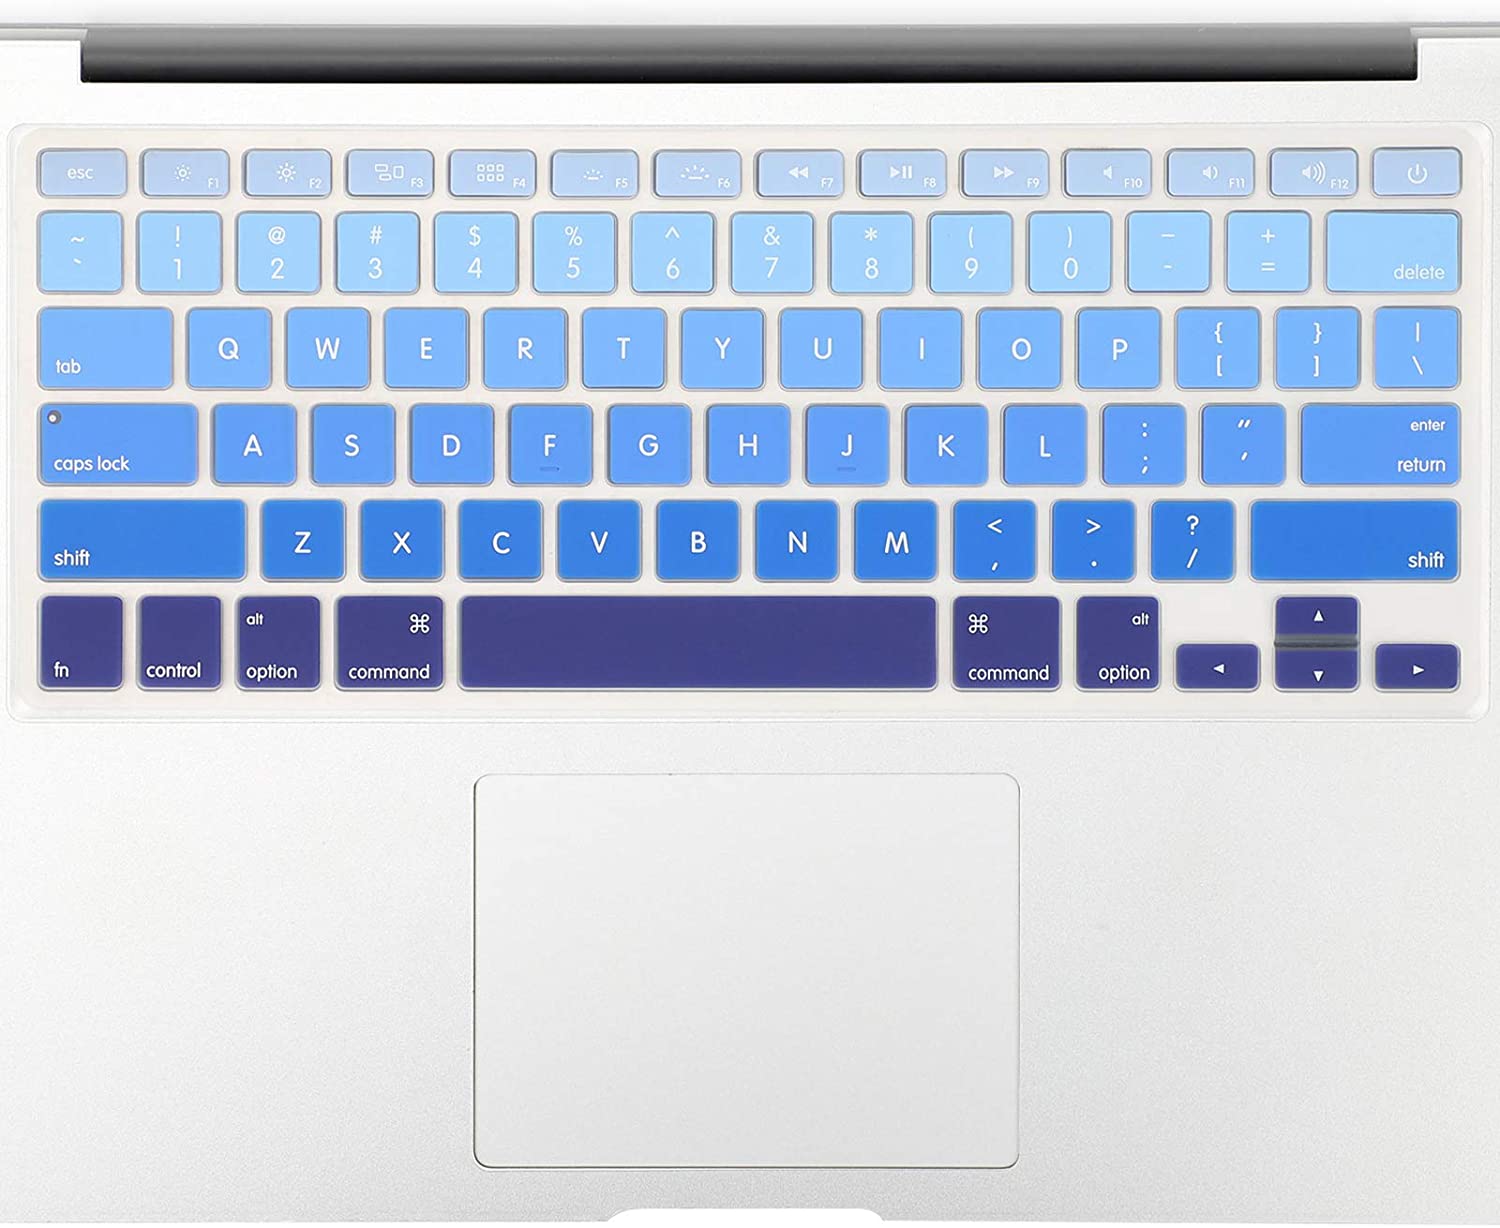 Silicone Keyboard Skin Cover for MacBook Pro 13/15 Inch (with/Without Retina Display, 2015 or Older Version),Older MacBook Air 13 Inch (FadeBlue)